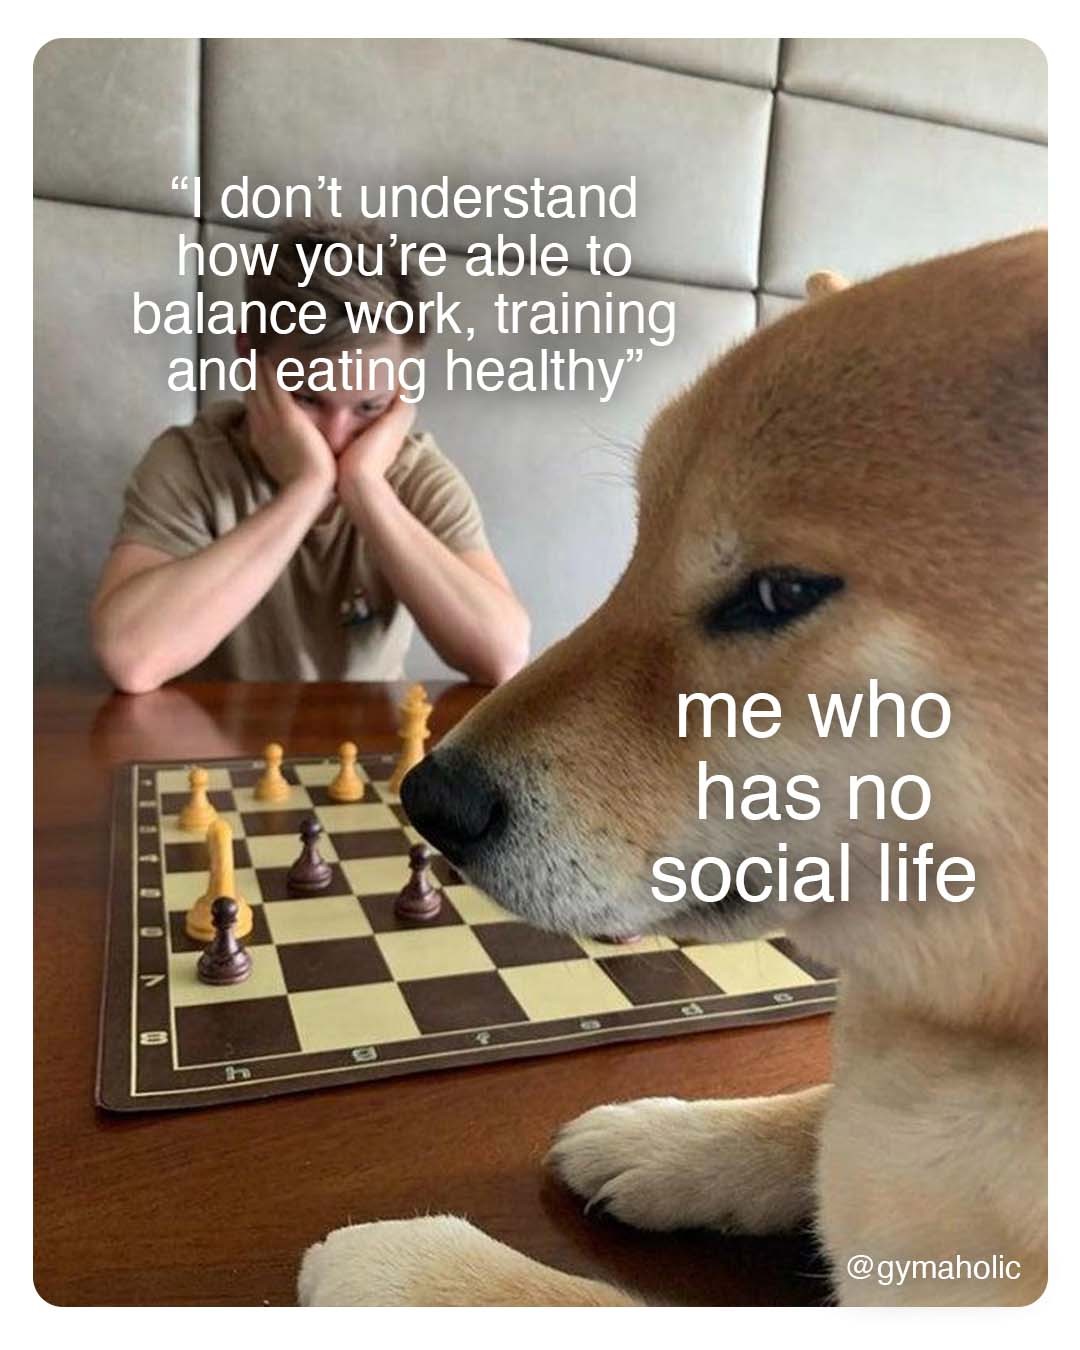 I don’t understand how you’re able to balance work, training and eating healthy